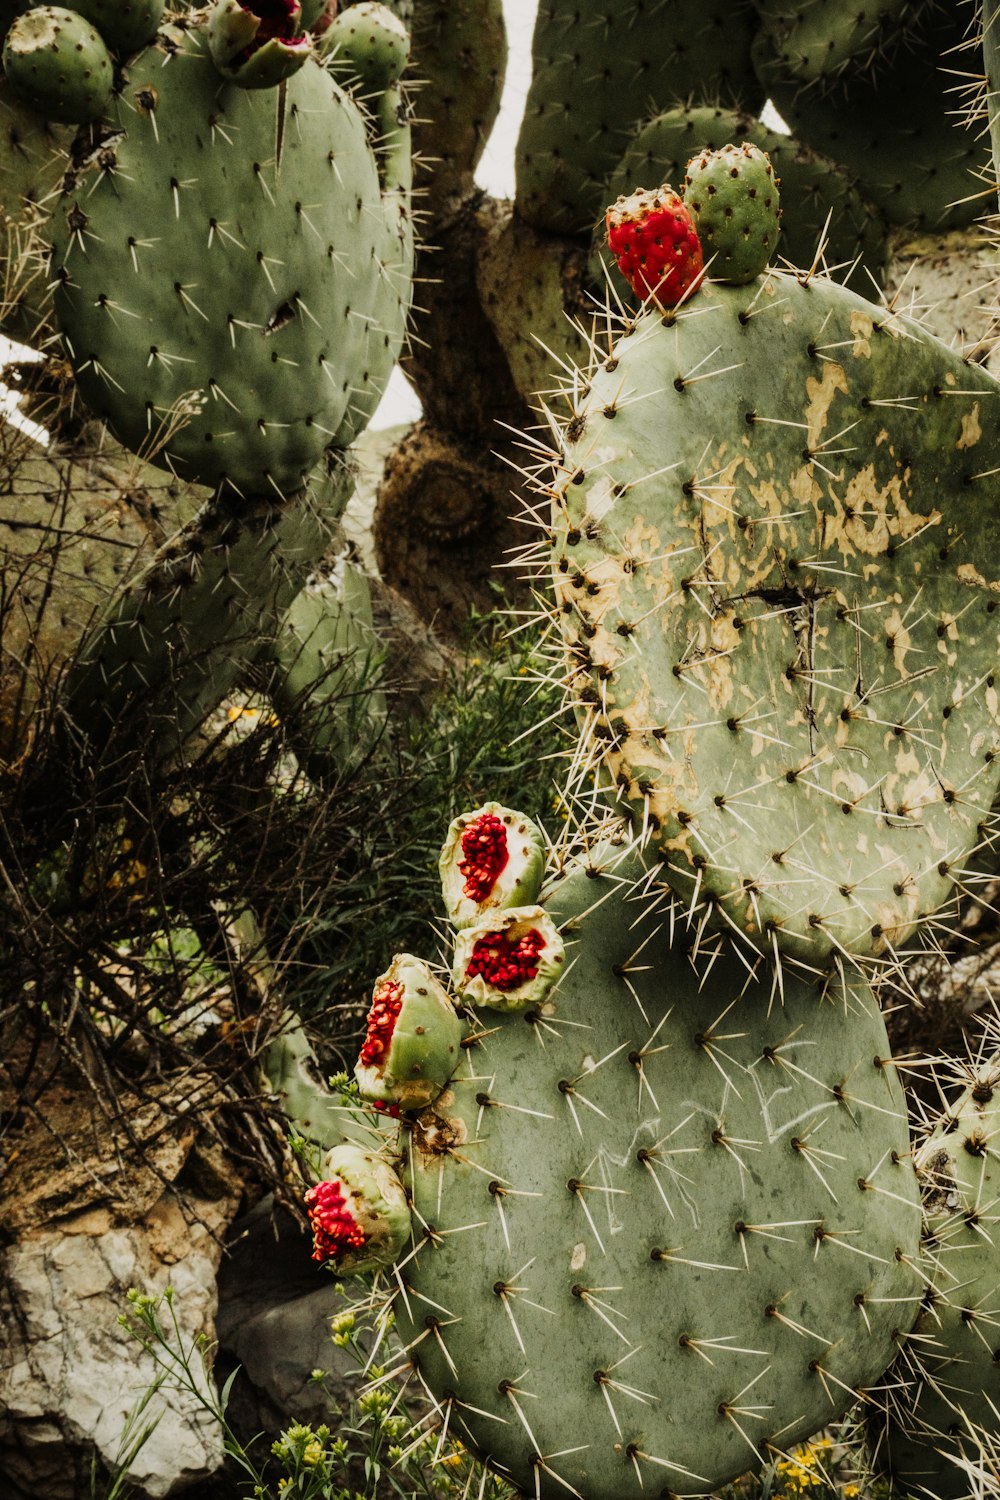 a group of cactus plants with red flowers